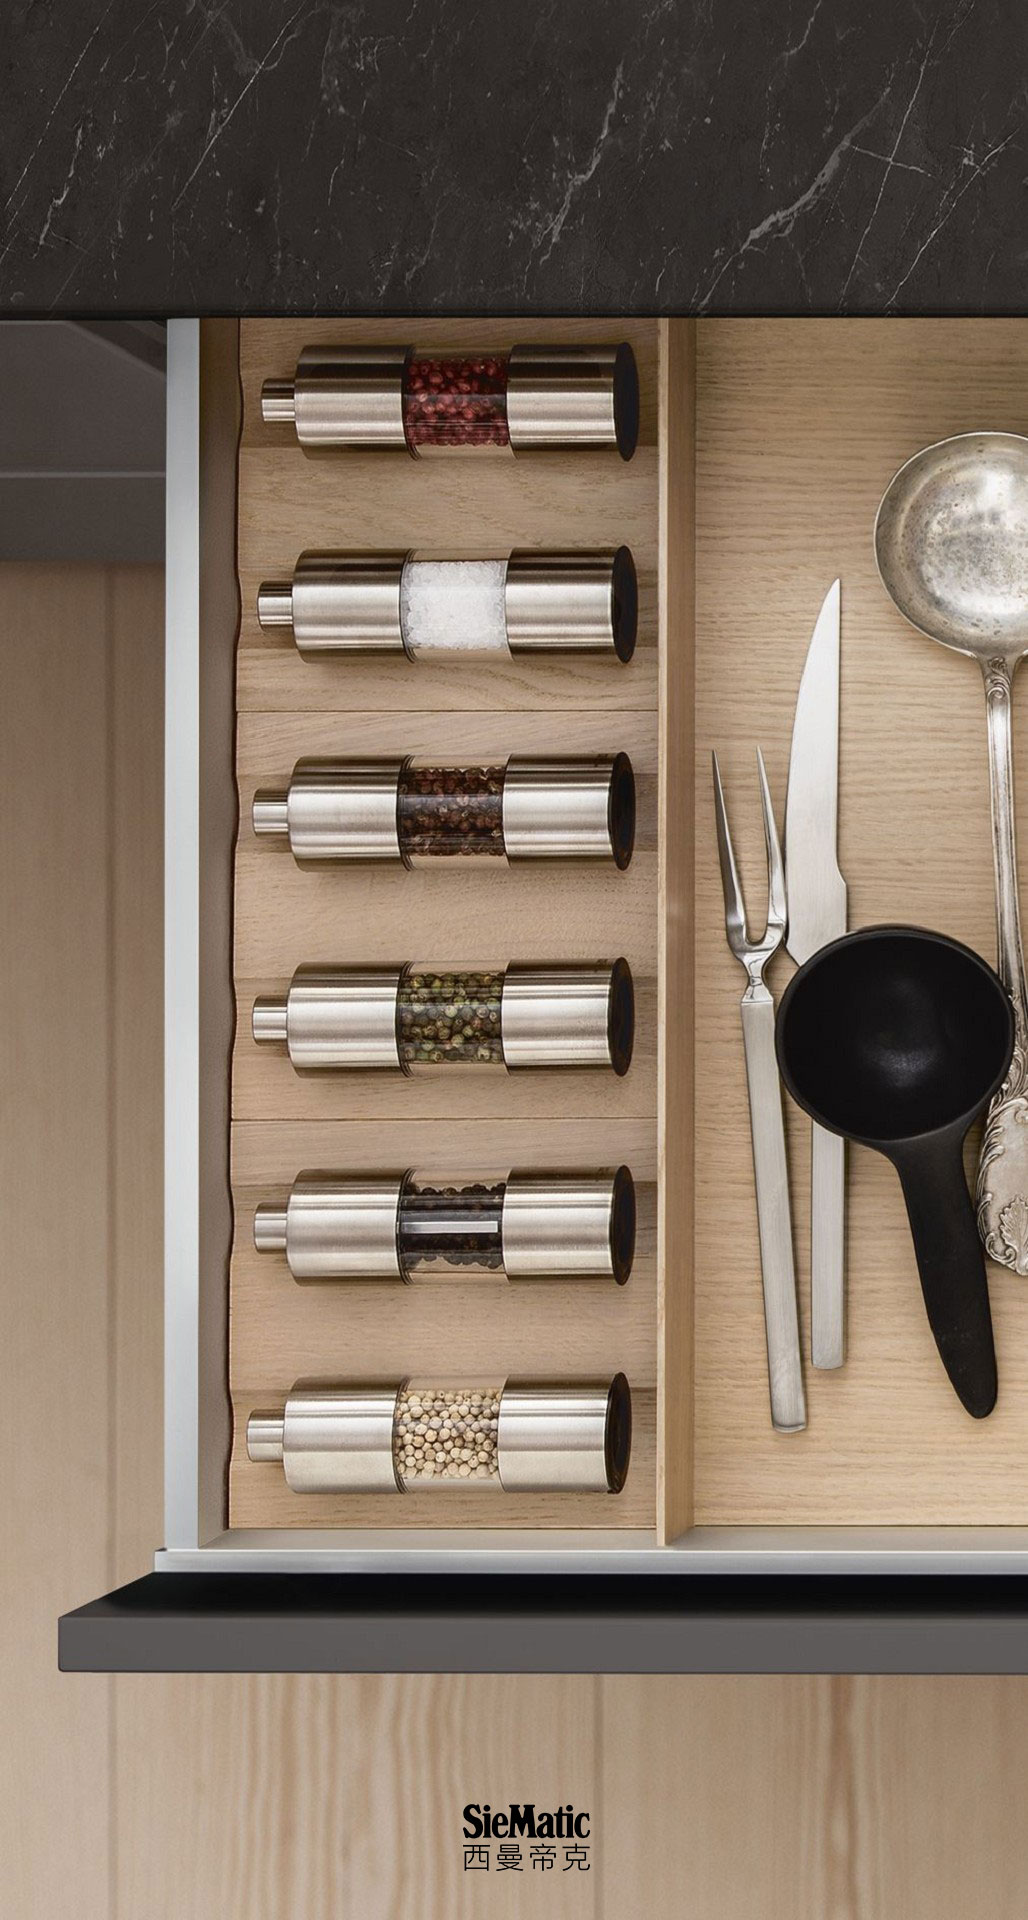 Spice mills from the SieMatic Wooden Interior Accessories System